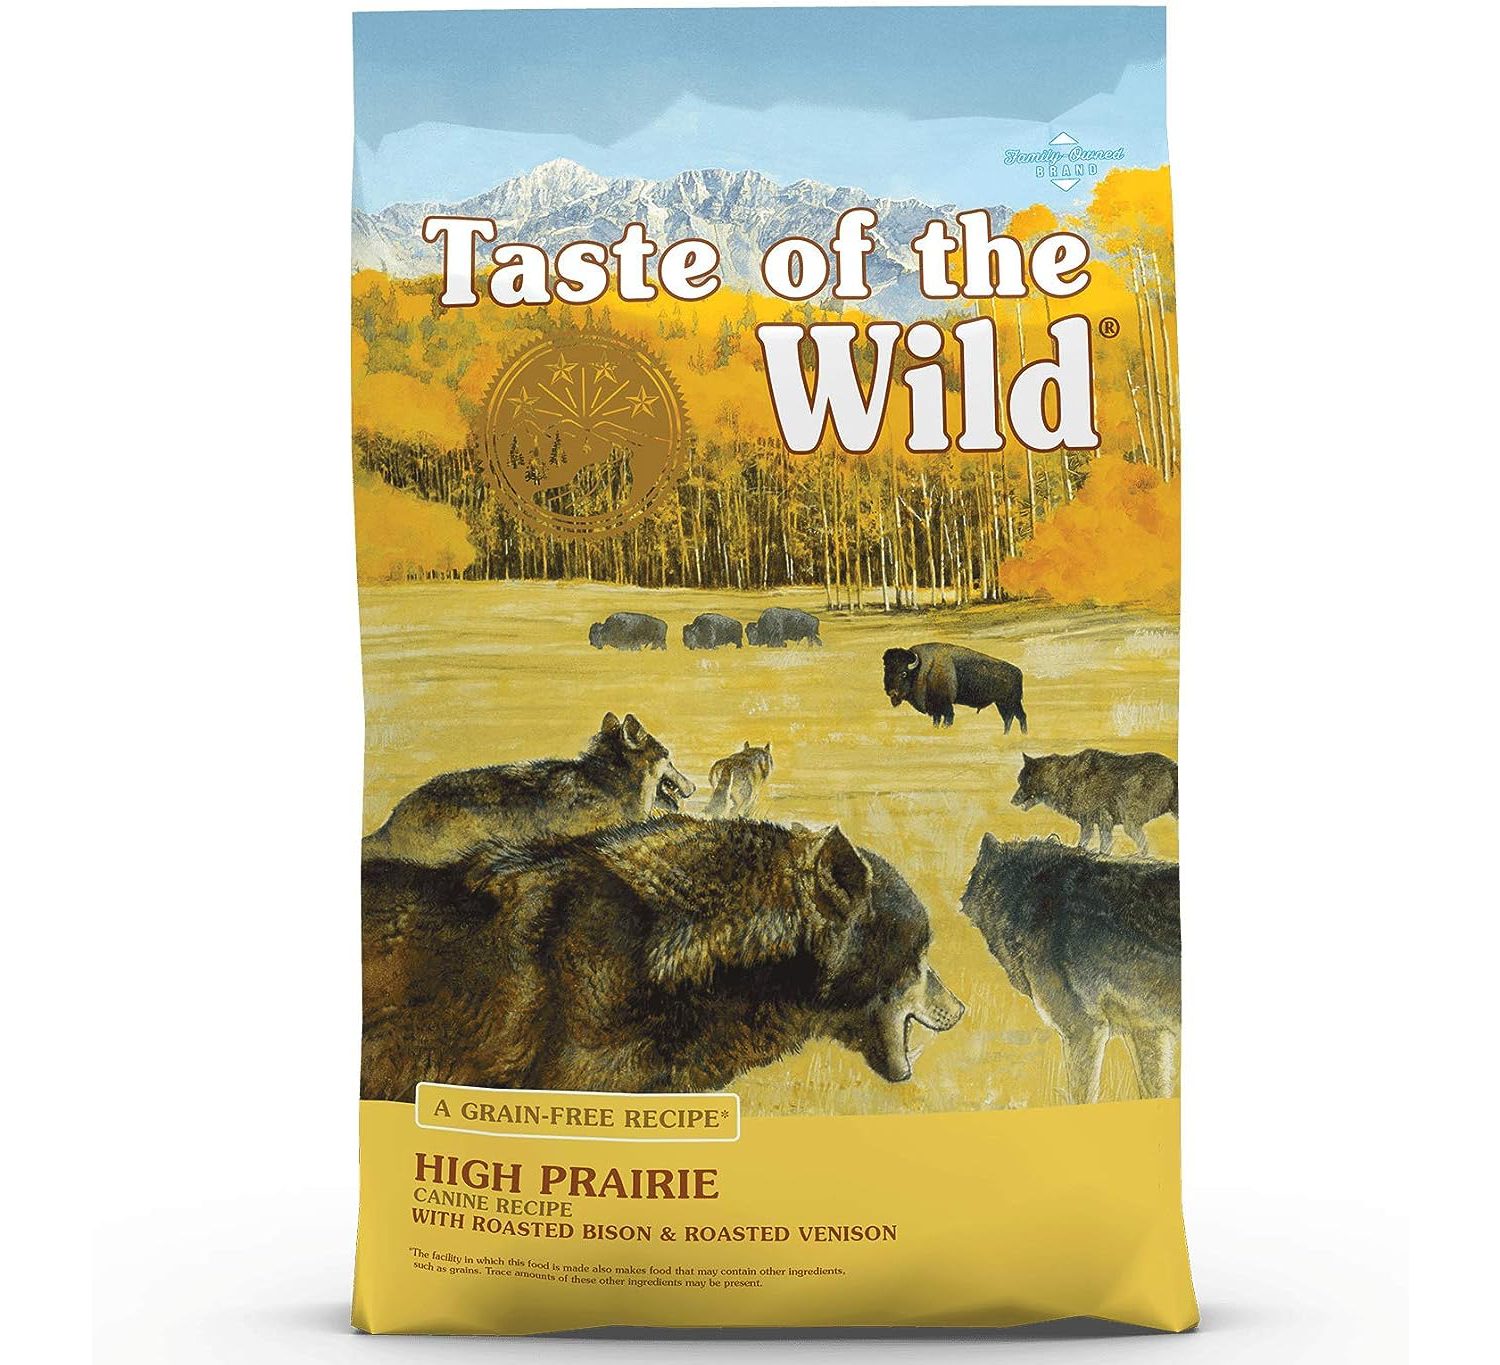 New Project Taste of the Wild High Prairie Canine Grain-Free Recipe with Roasted Bison and Venison Adult Dry Dog Food